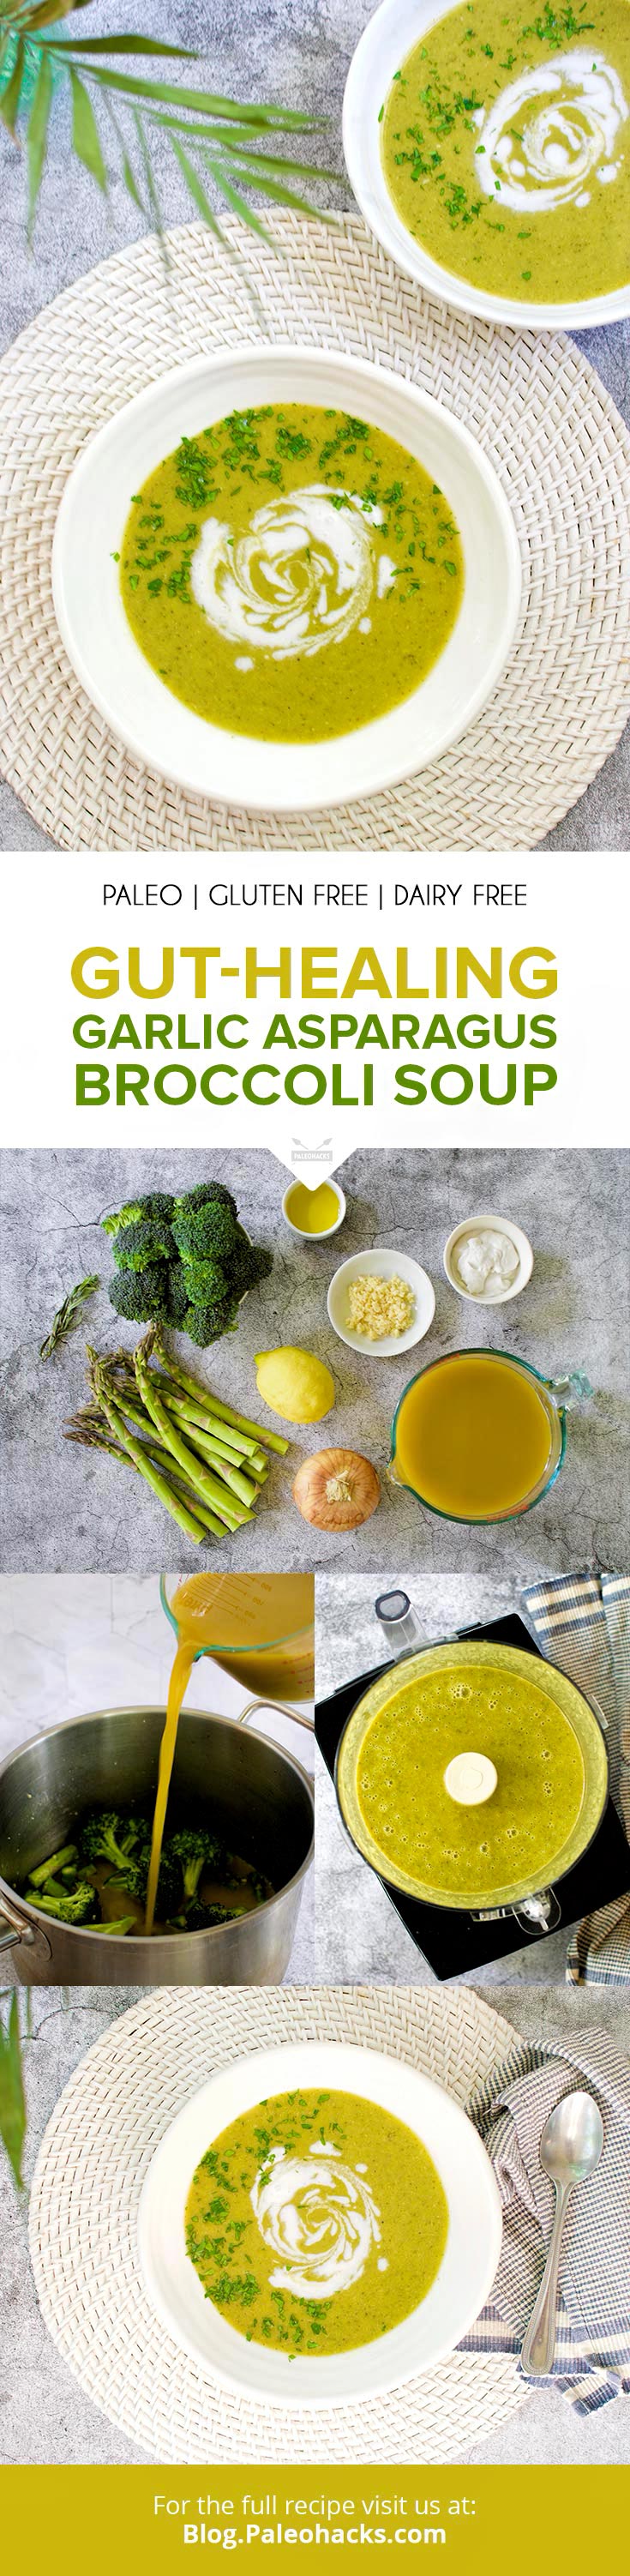 Load up on antioxidants with this easy and comforting soup, packed with vibrant green veggies and collagen-rich bone broth.